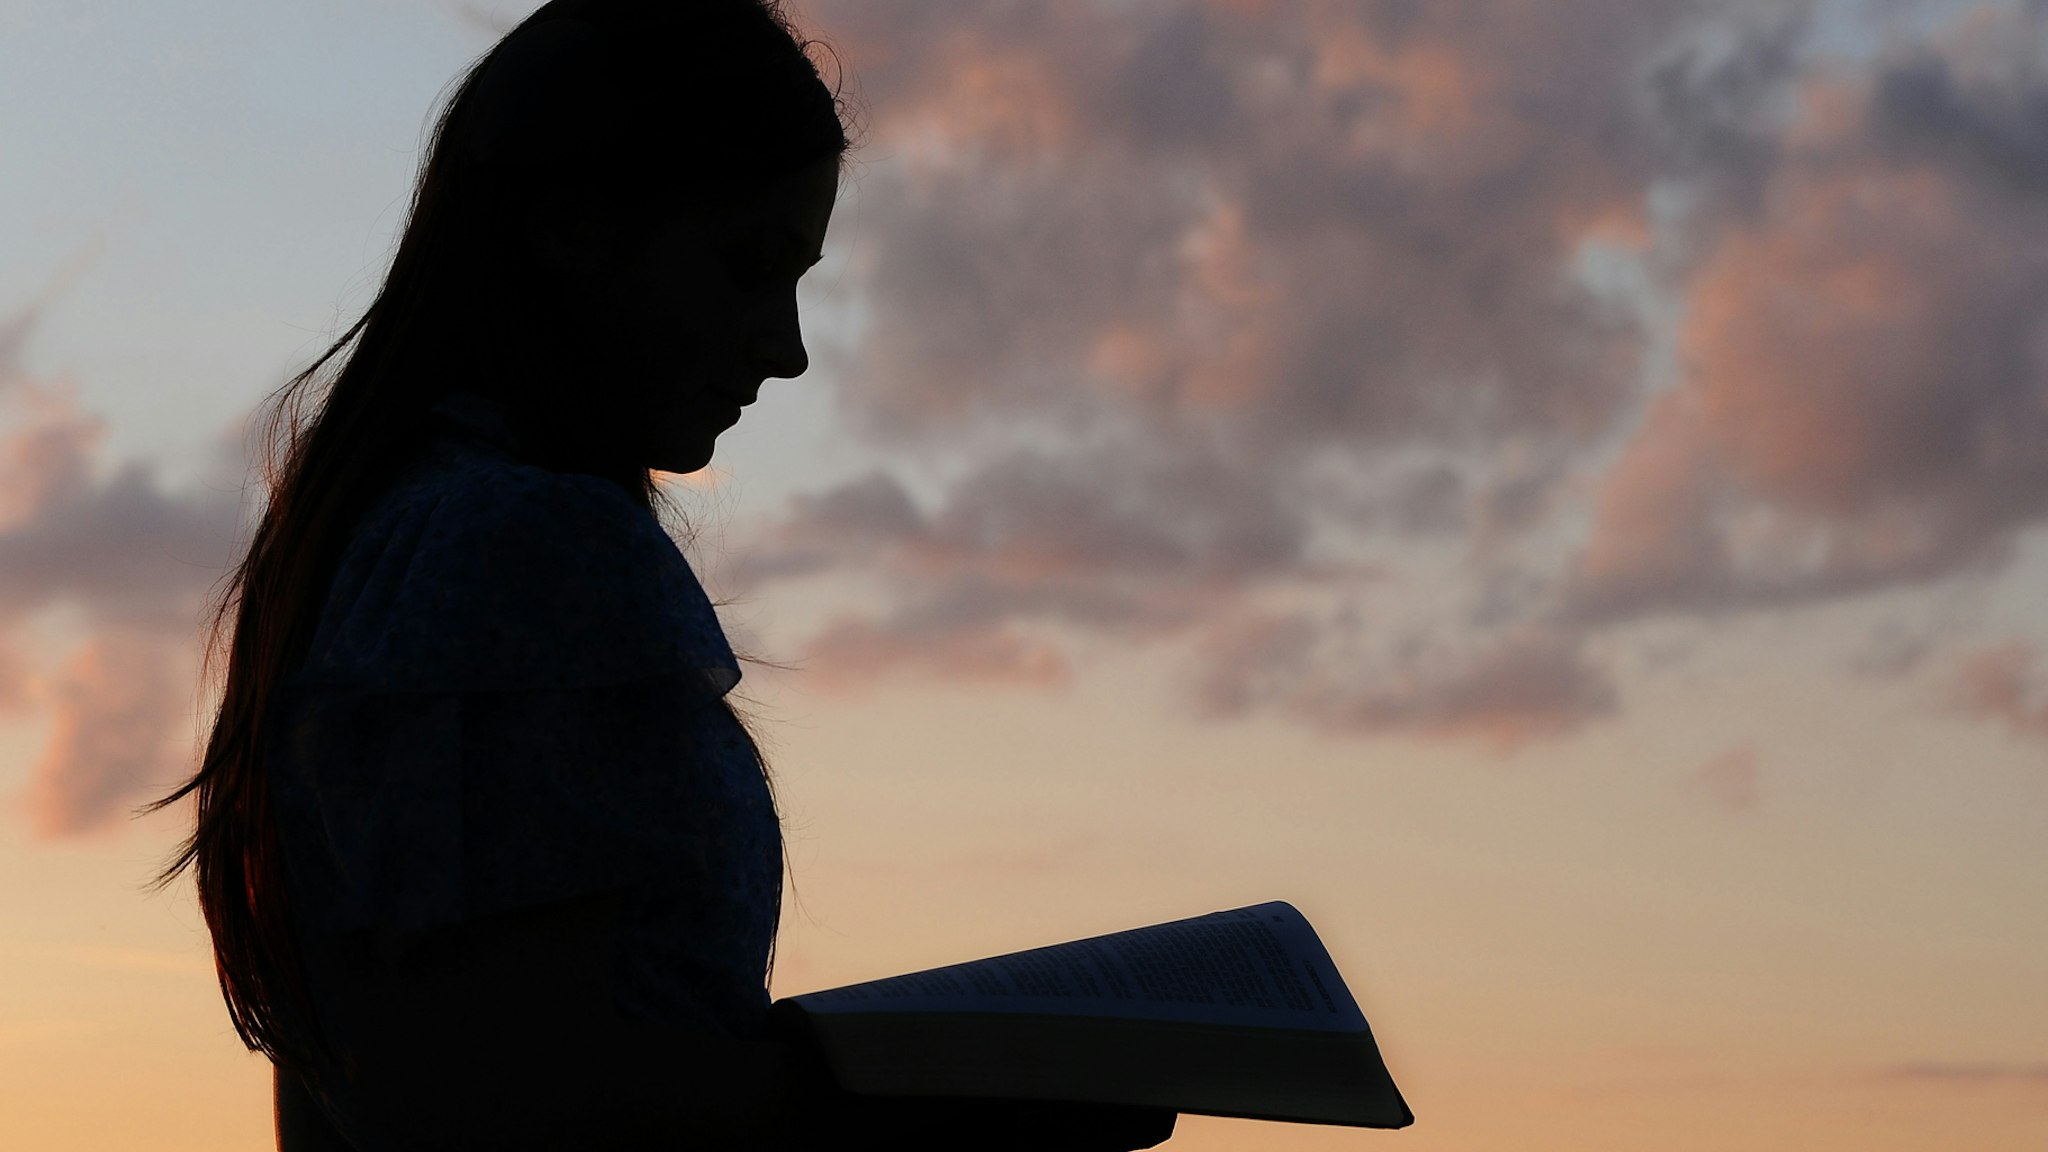 Silhouette of a young girl reading from Bible in sunset light.